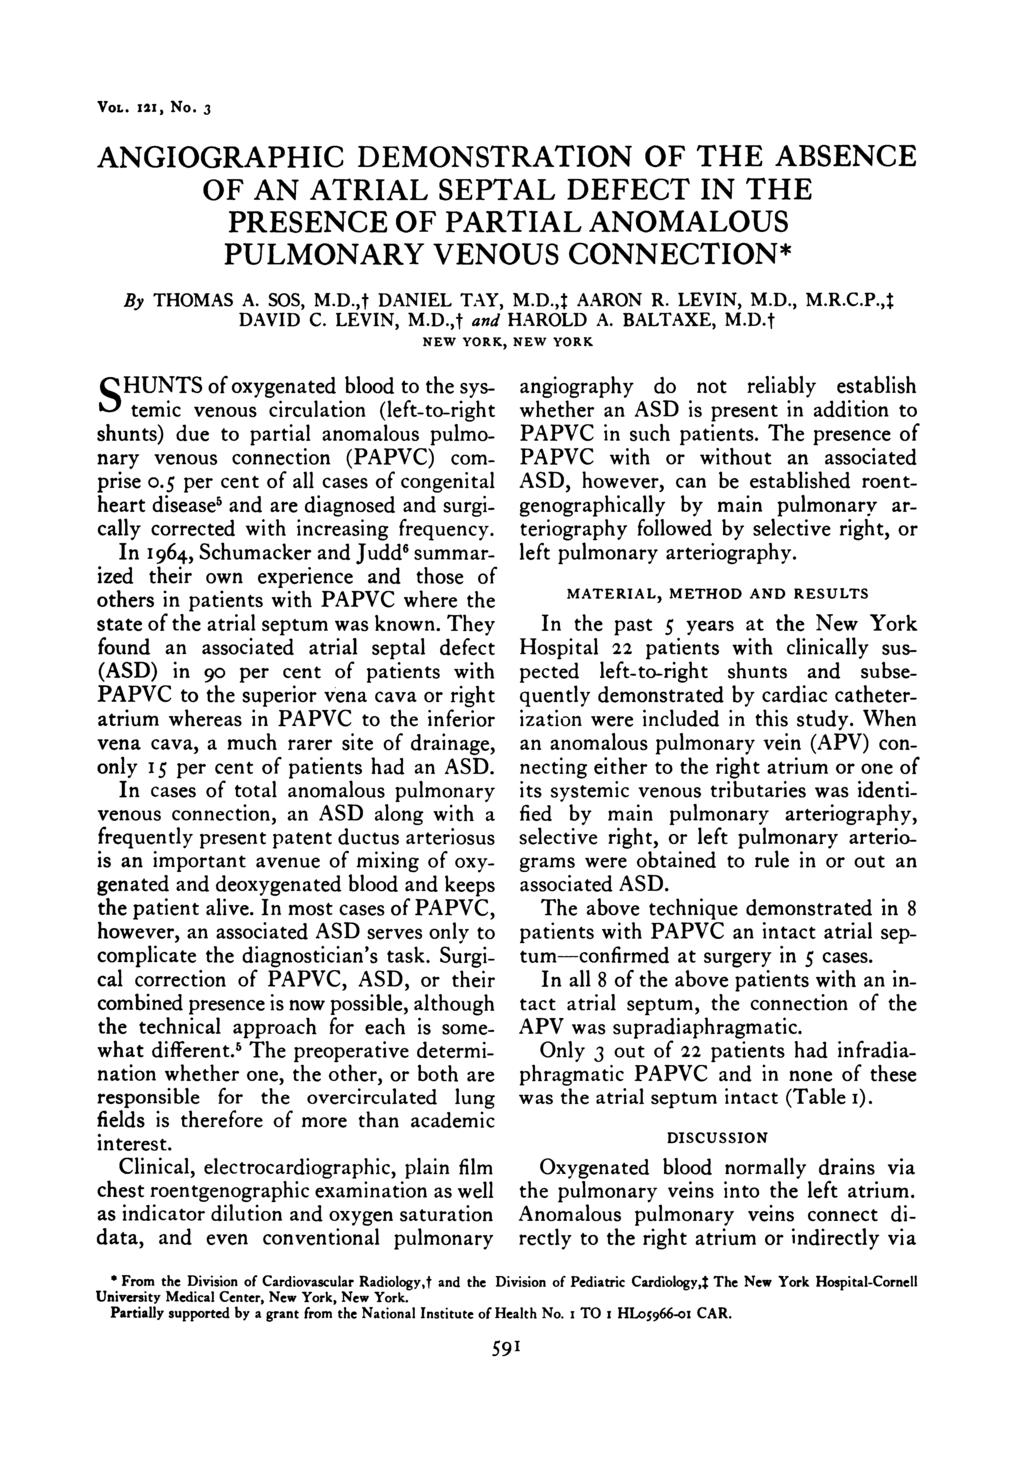 VOL. 121, No. 3 ANGIOGRAPHIC DEMONSTRATION OF THE ABSENCE OF AN ATRIAL SEPTAL DEFECT IN THE PRESENCE OF PARTIAL ANOMALOUS PULMONARY VENOUS CONNECTION* By THOMAS A. SOS, M.D.,t DANIEL TAY, M.D.,t AARON R.